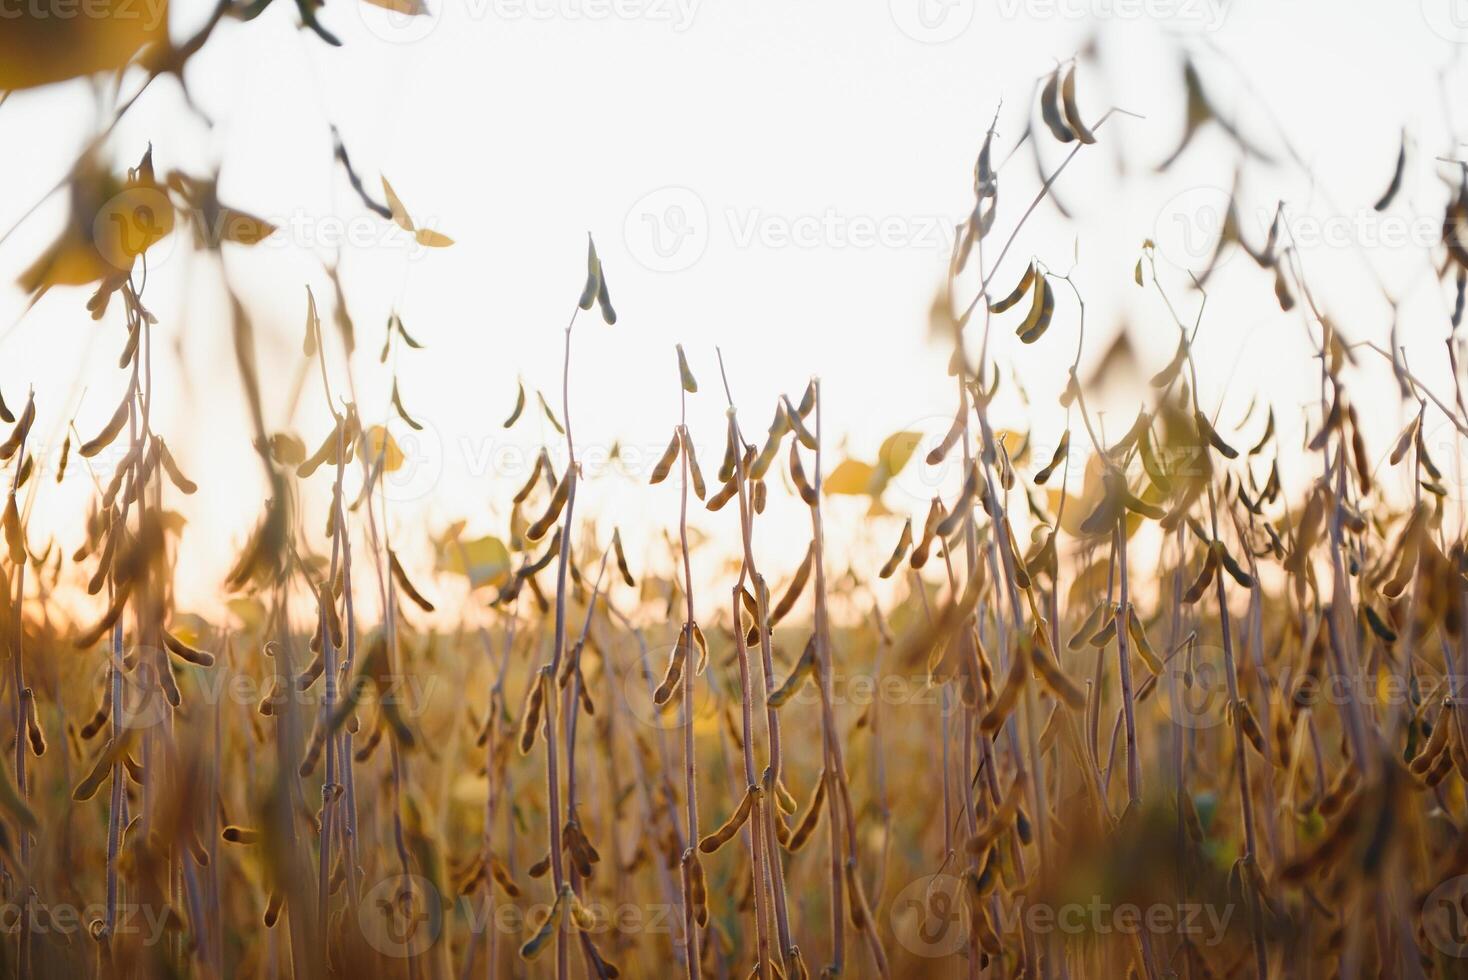 Mature soybean pods, back-lit by evening sun. Soy agriculture photo